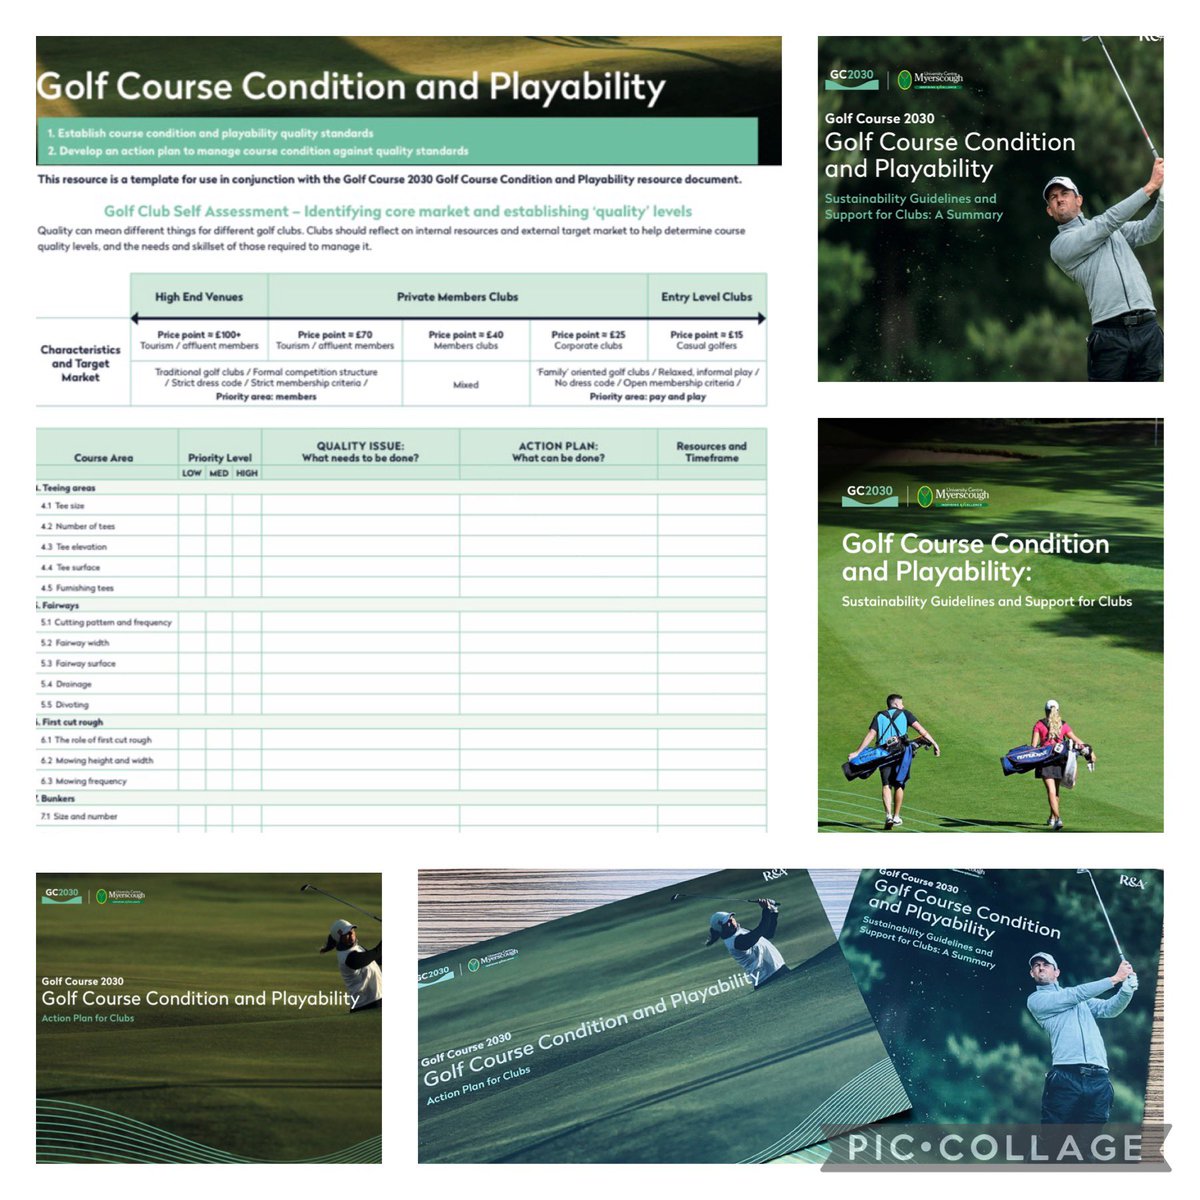 Fantastic to be able to launch @MyerscoughColl @My_GolfNews @RandA Golf Course 2030 research on issues of sustainability & golf course quality at @BIGGALtd #BTME2023 conference #qualityissues #widerpressures #sustainablefutures #roadmap #industryresearch